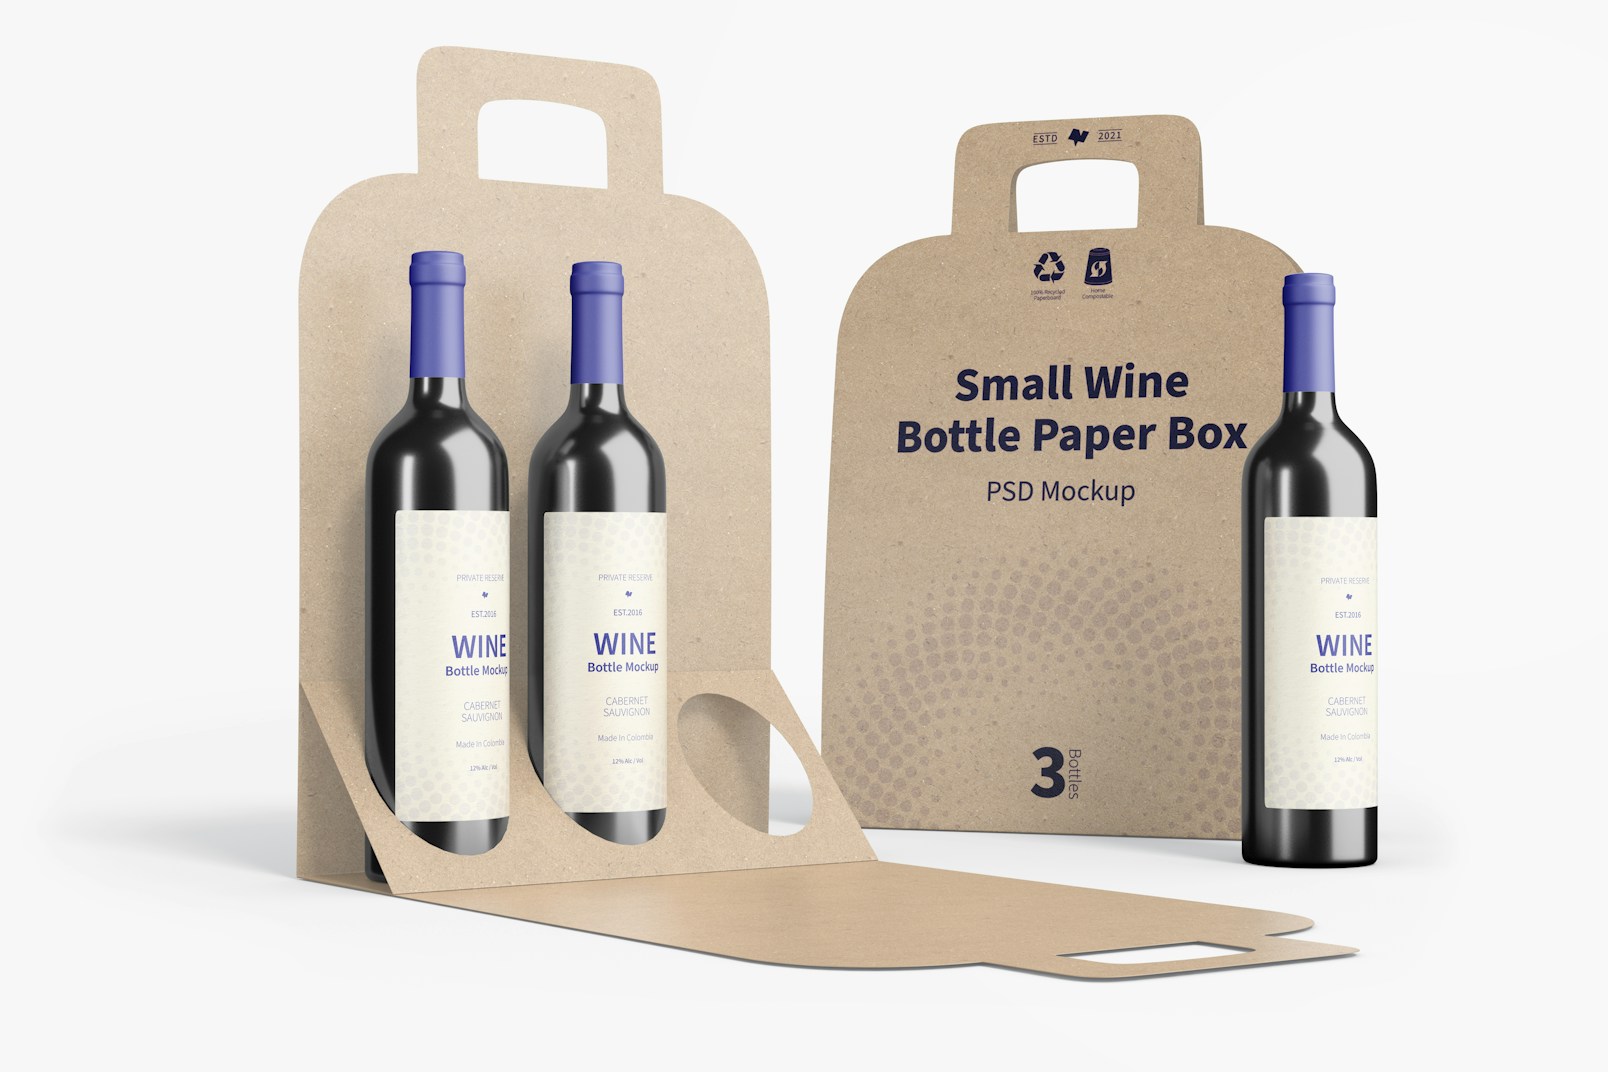 Small Wine Bottle Paper Boxes Mockup, Floating